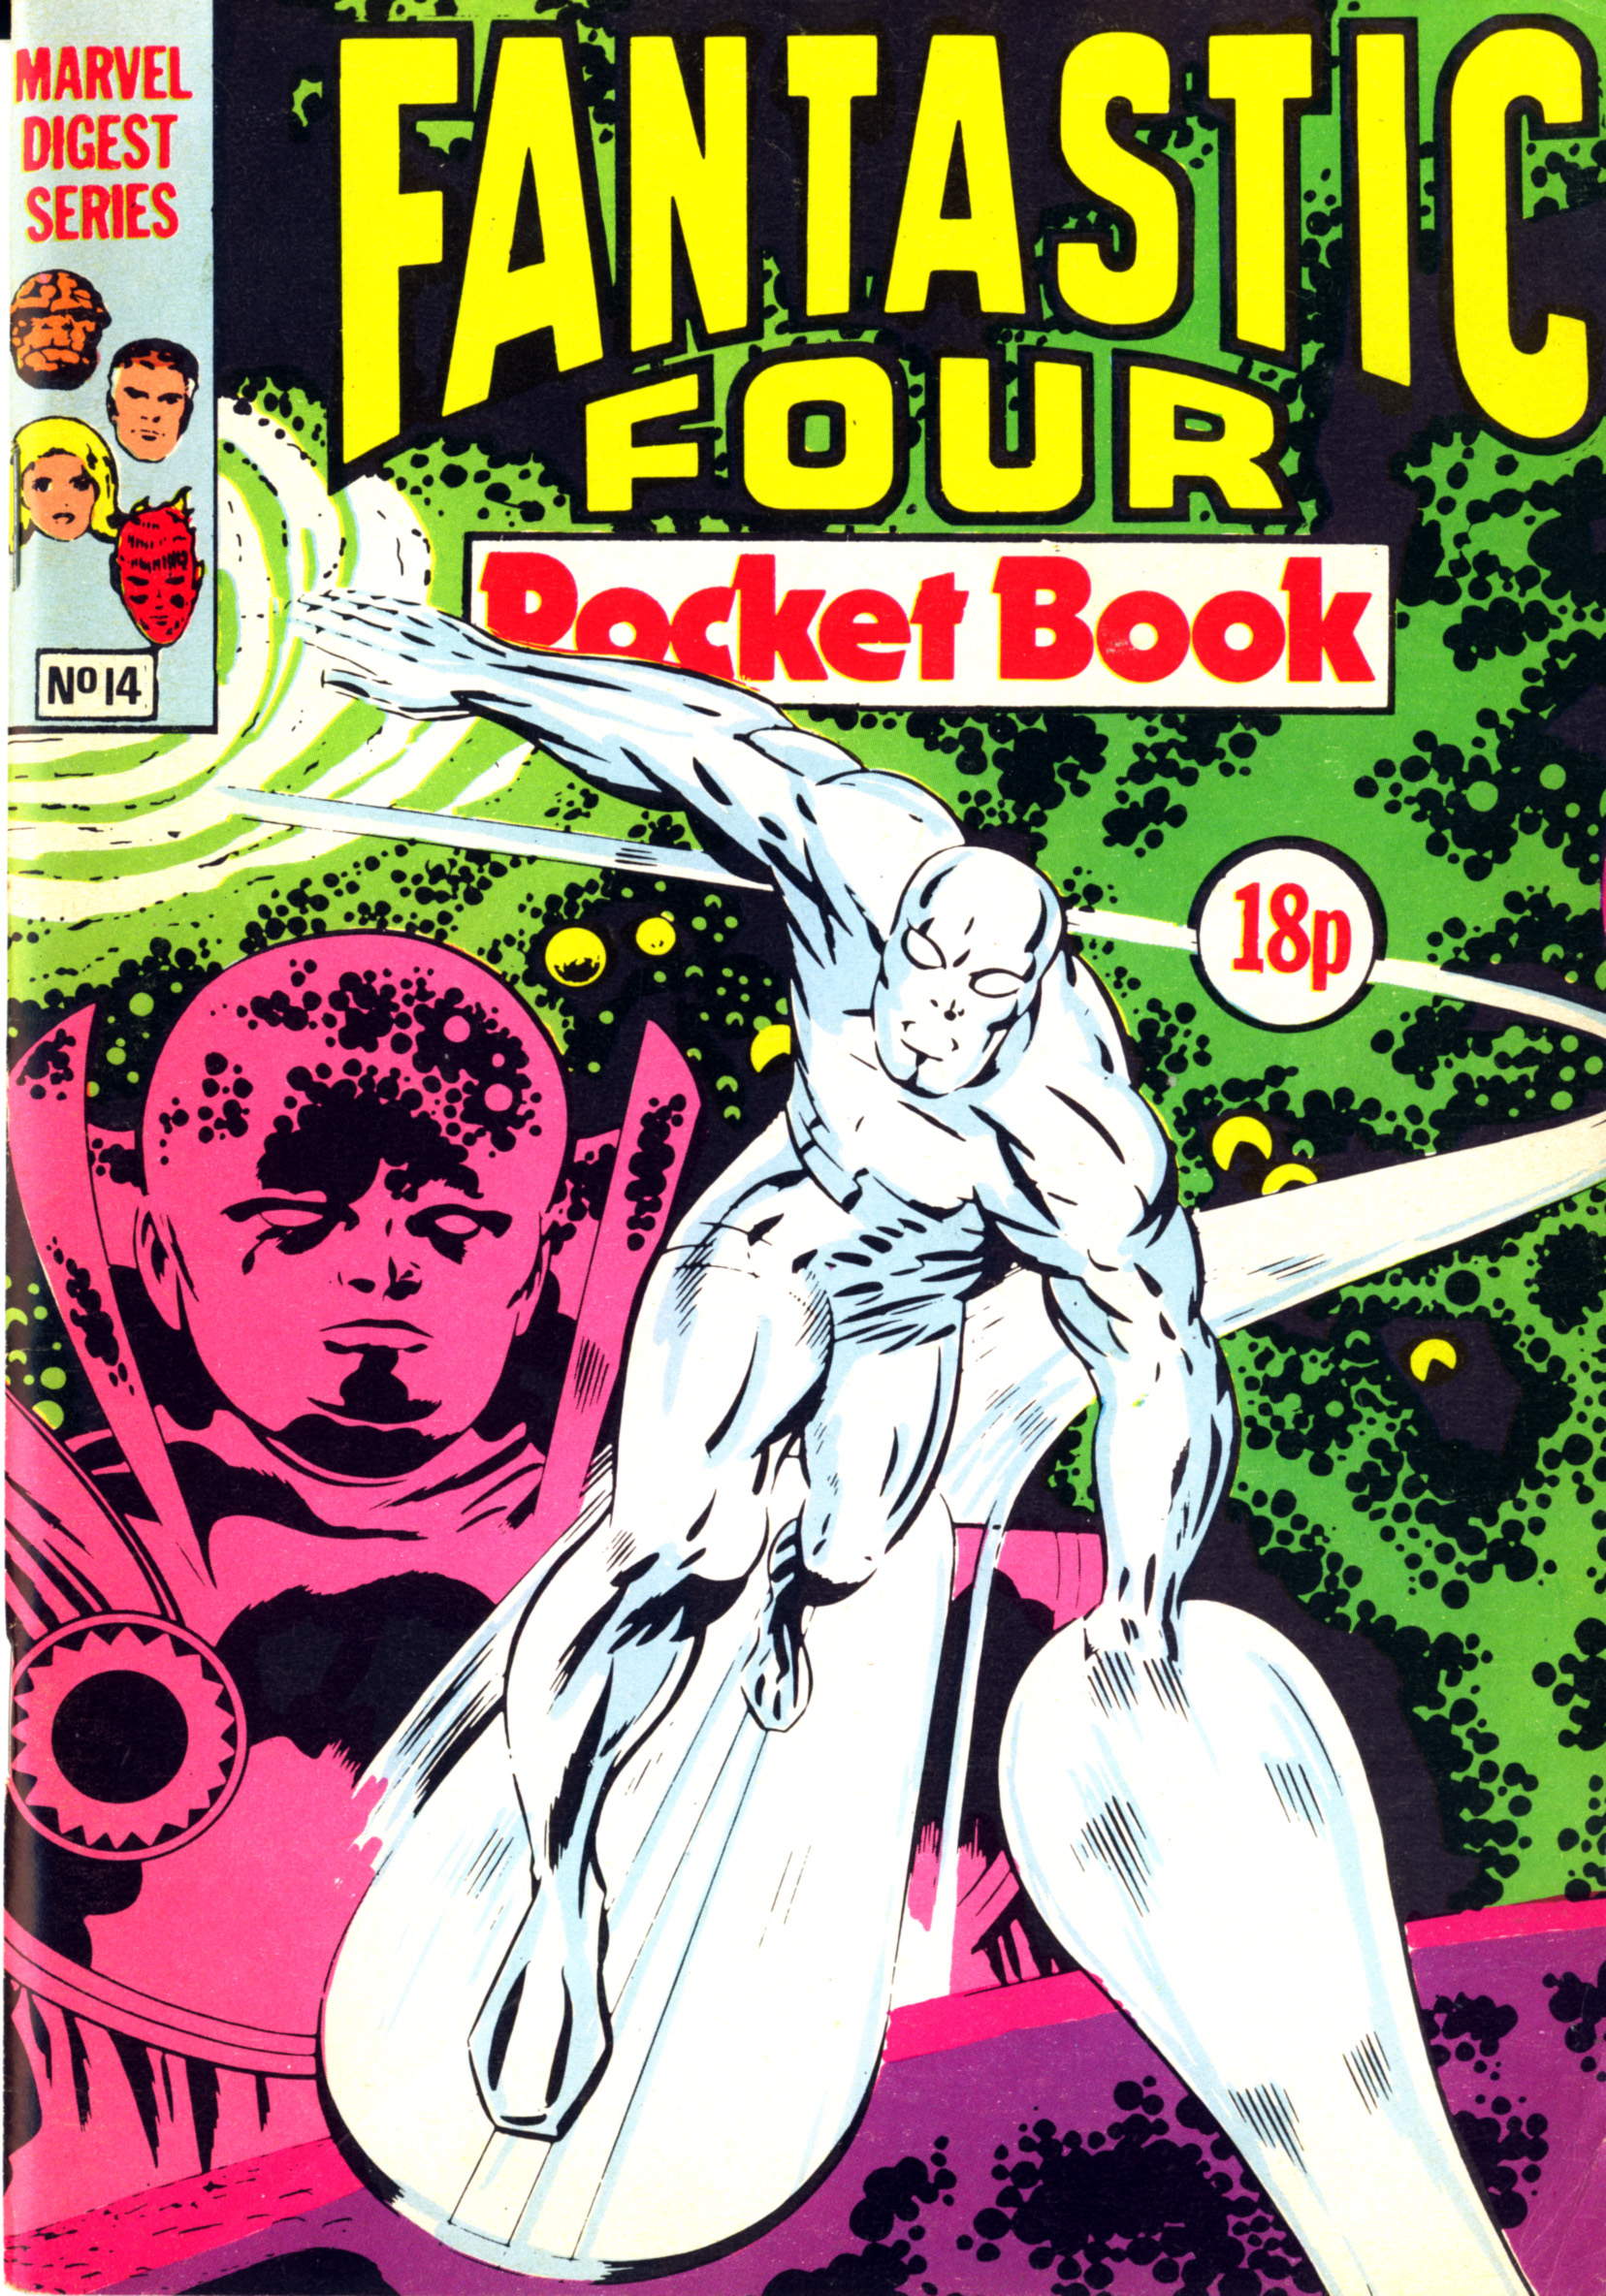 Read online Fantastic Four Pocket Book comic -  Issue #14 - 1